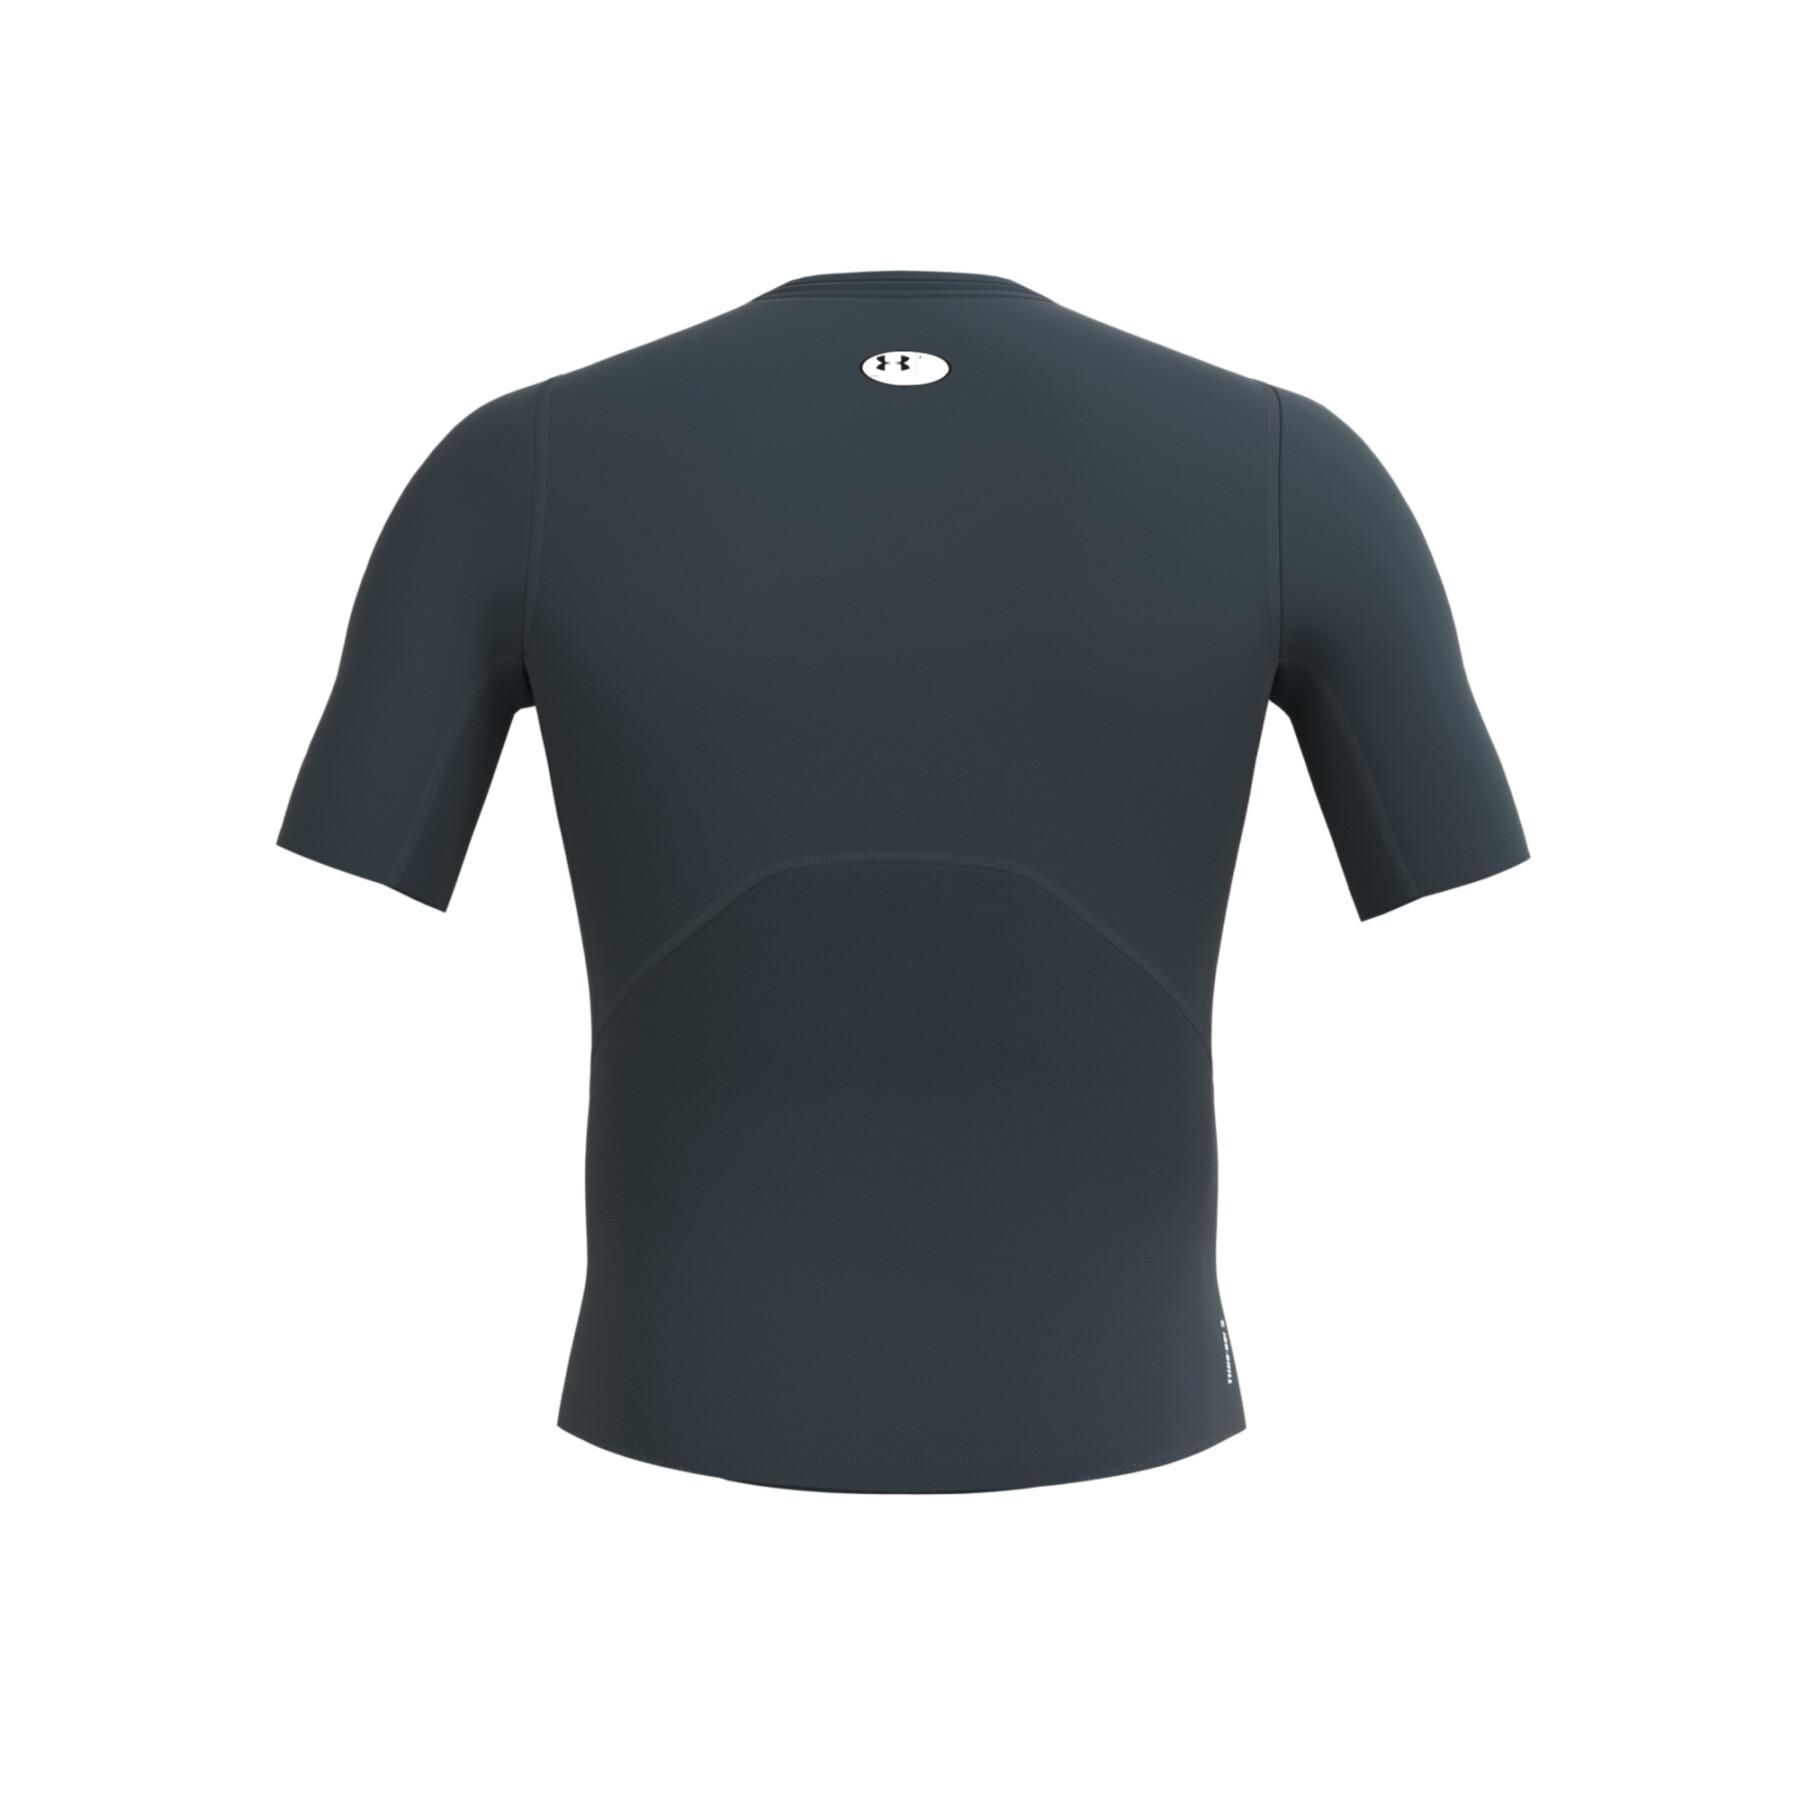 Sous maillot Under Armour Iso-chill run